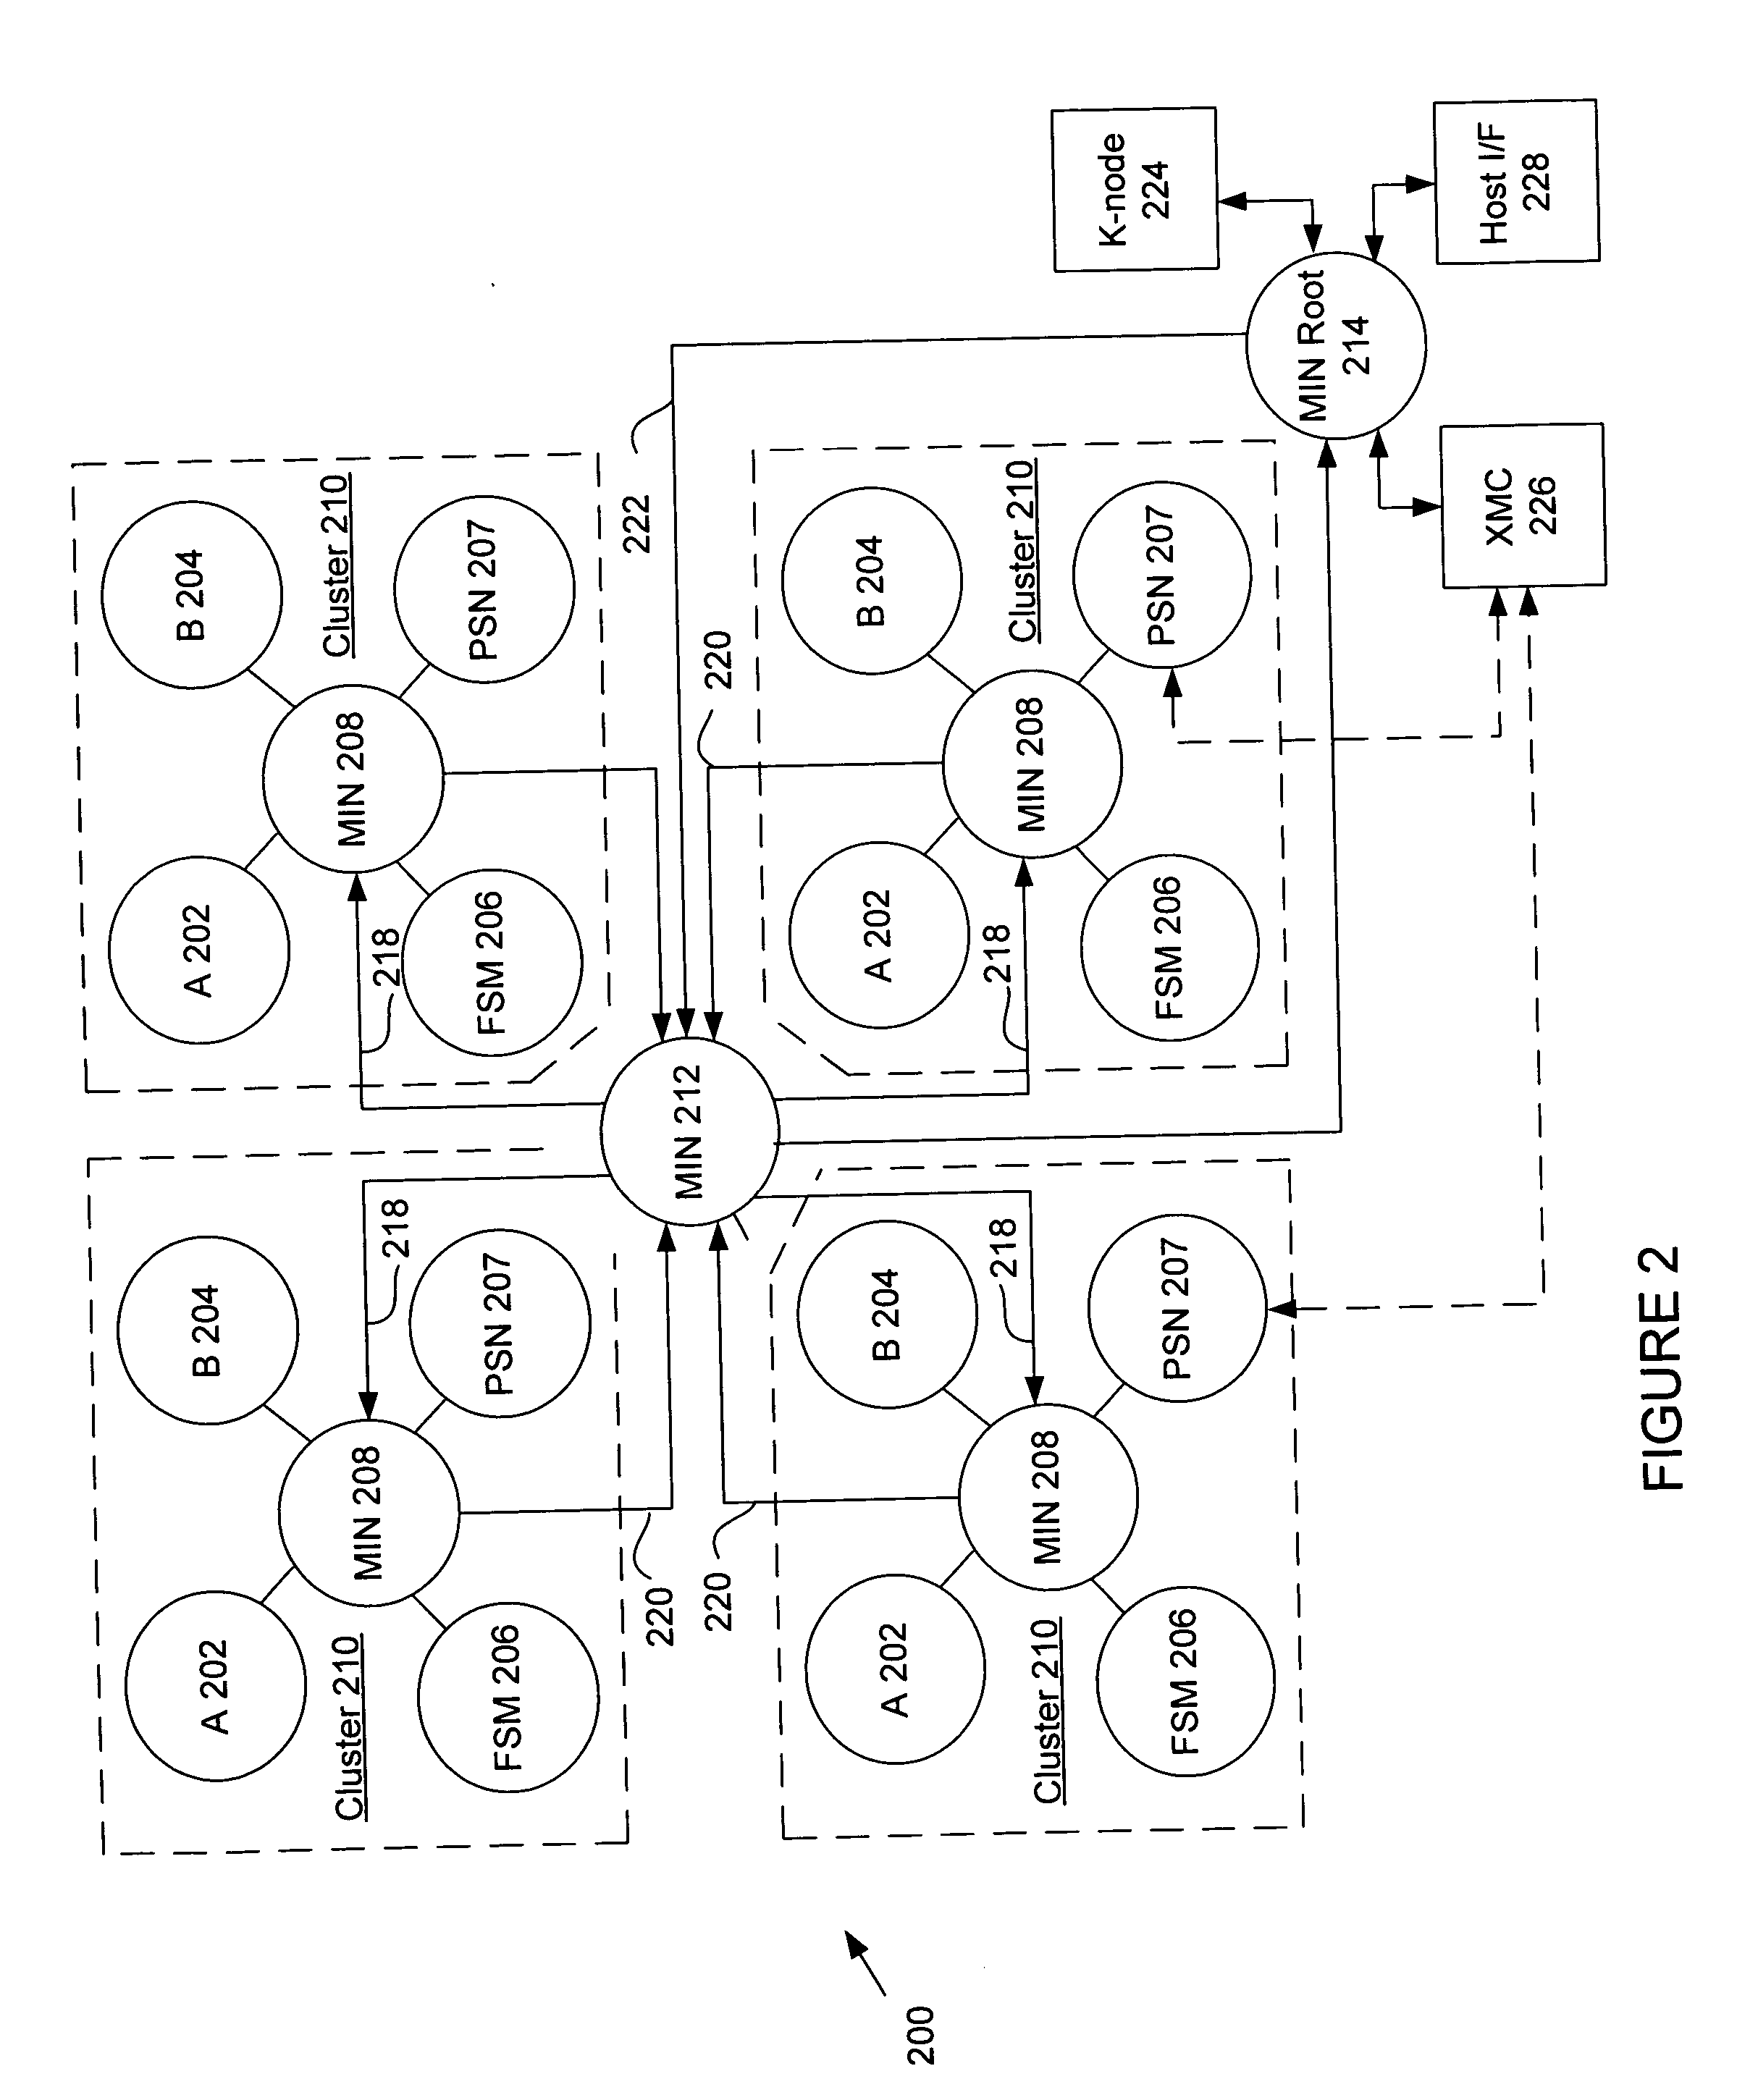 System and method using embedded microprocessor as a node in an adaptable computing machine